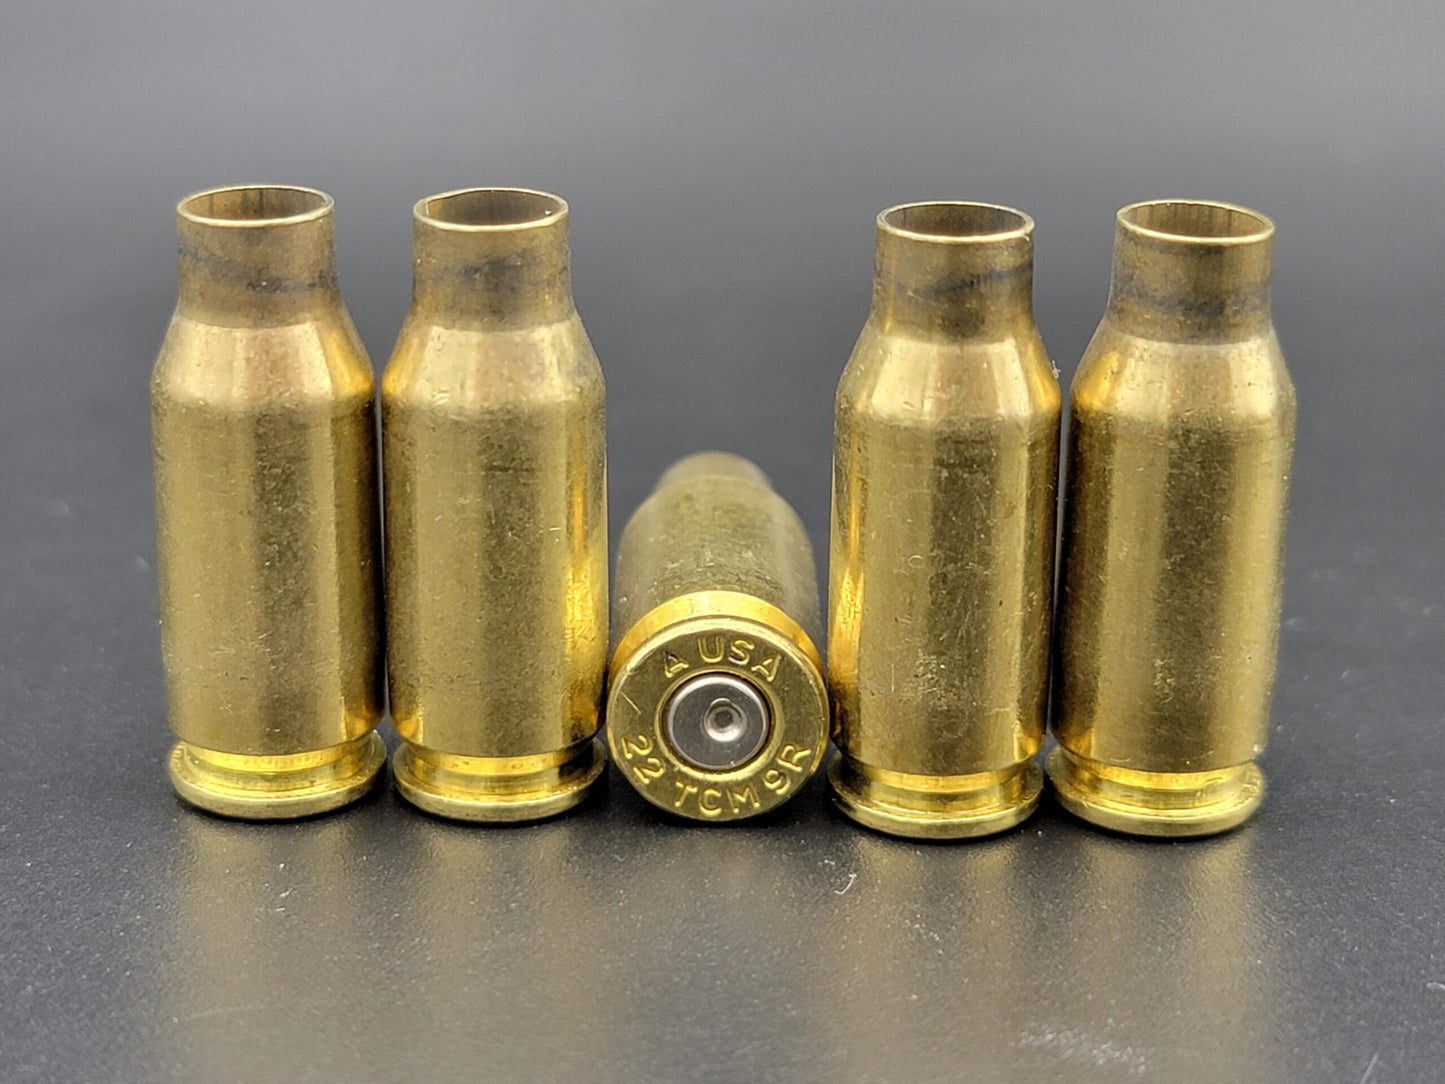 22 TCM once fired rifle brass. Hand sorted from reputable indoor/military ranges for reloading. Reliable spent casings for precision shooting.